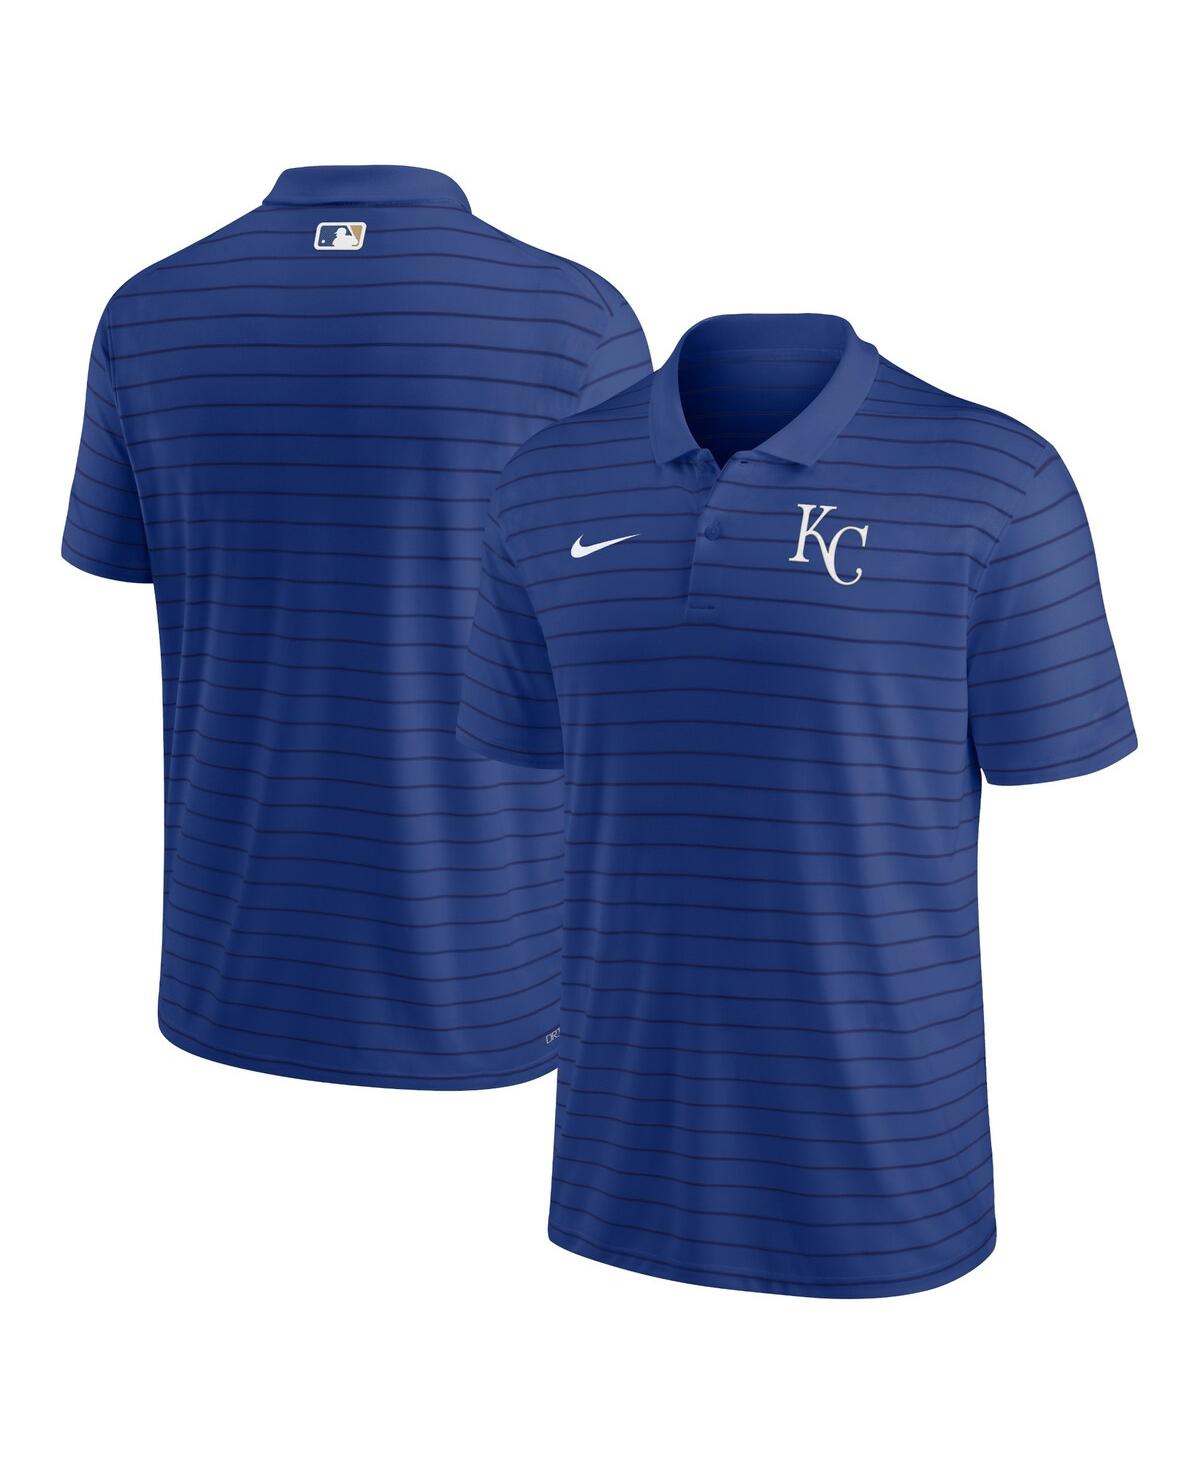 Shop Nike Men's  Royal Kansas City Royals Authentic Collection Victory Striped Performance Polo Shirt